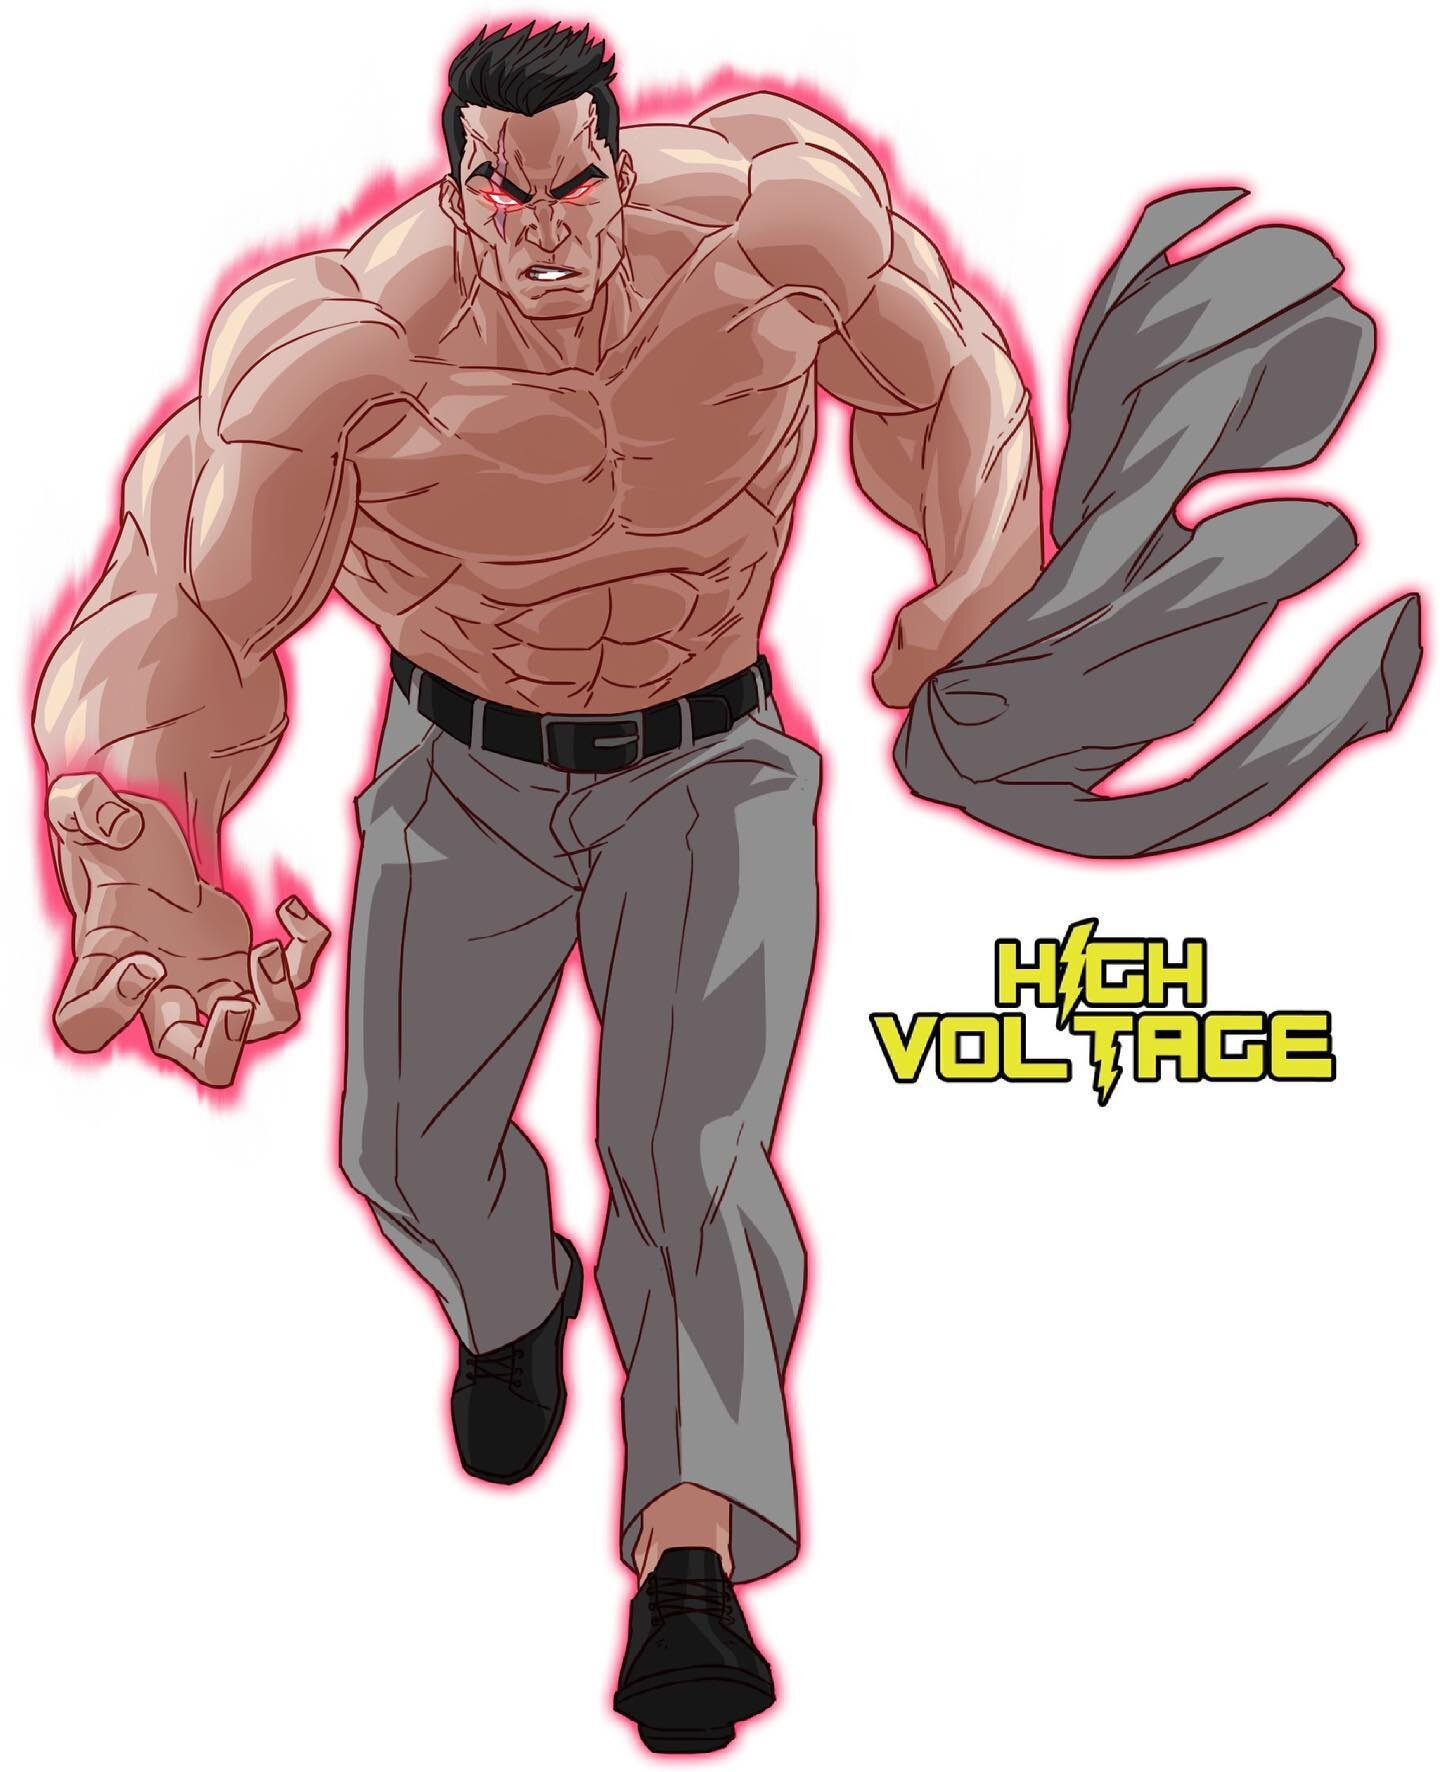 Here&rsquo;s the finalized picture from the last post! This is Al Salvatore, also know as the &ldquo;Big Guy.&rdquo; He is the big bad in season 2 of High Voltage. His power is his super strength.

Al Salvatore is actually a renowned business man and